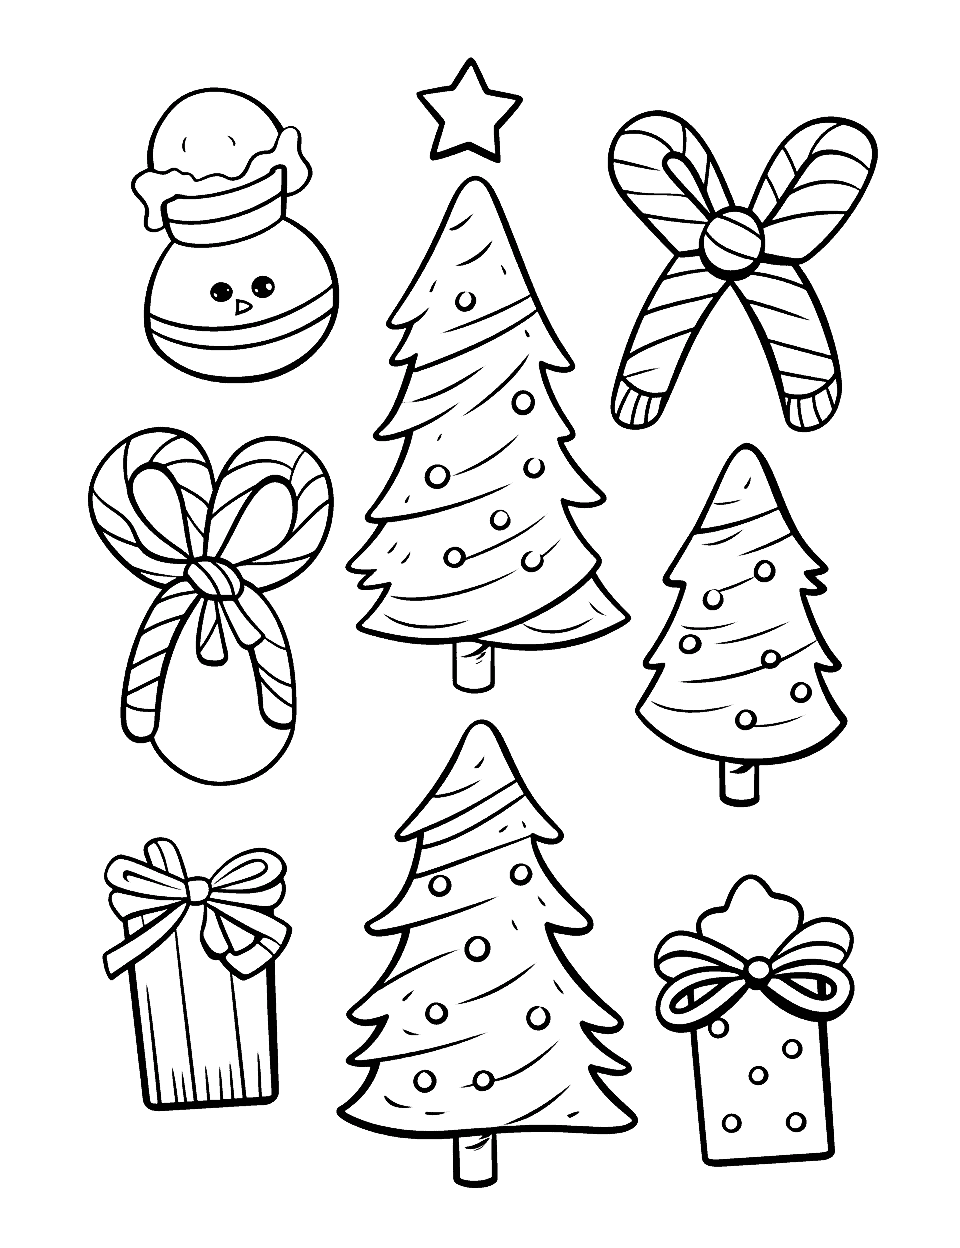 Christmas Doodles Coloring Page - A variety of Christmas doodles, perfect for kindergarteners to color.